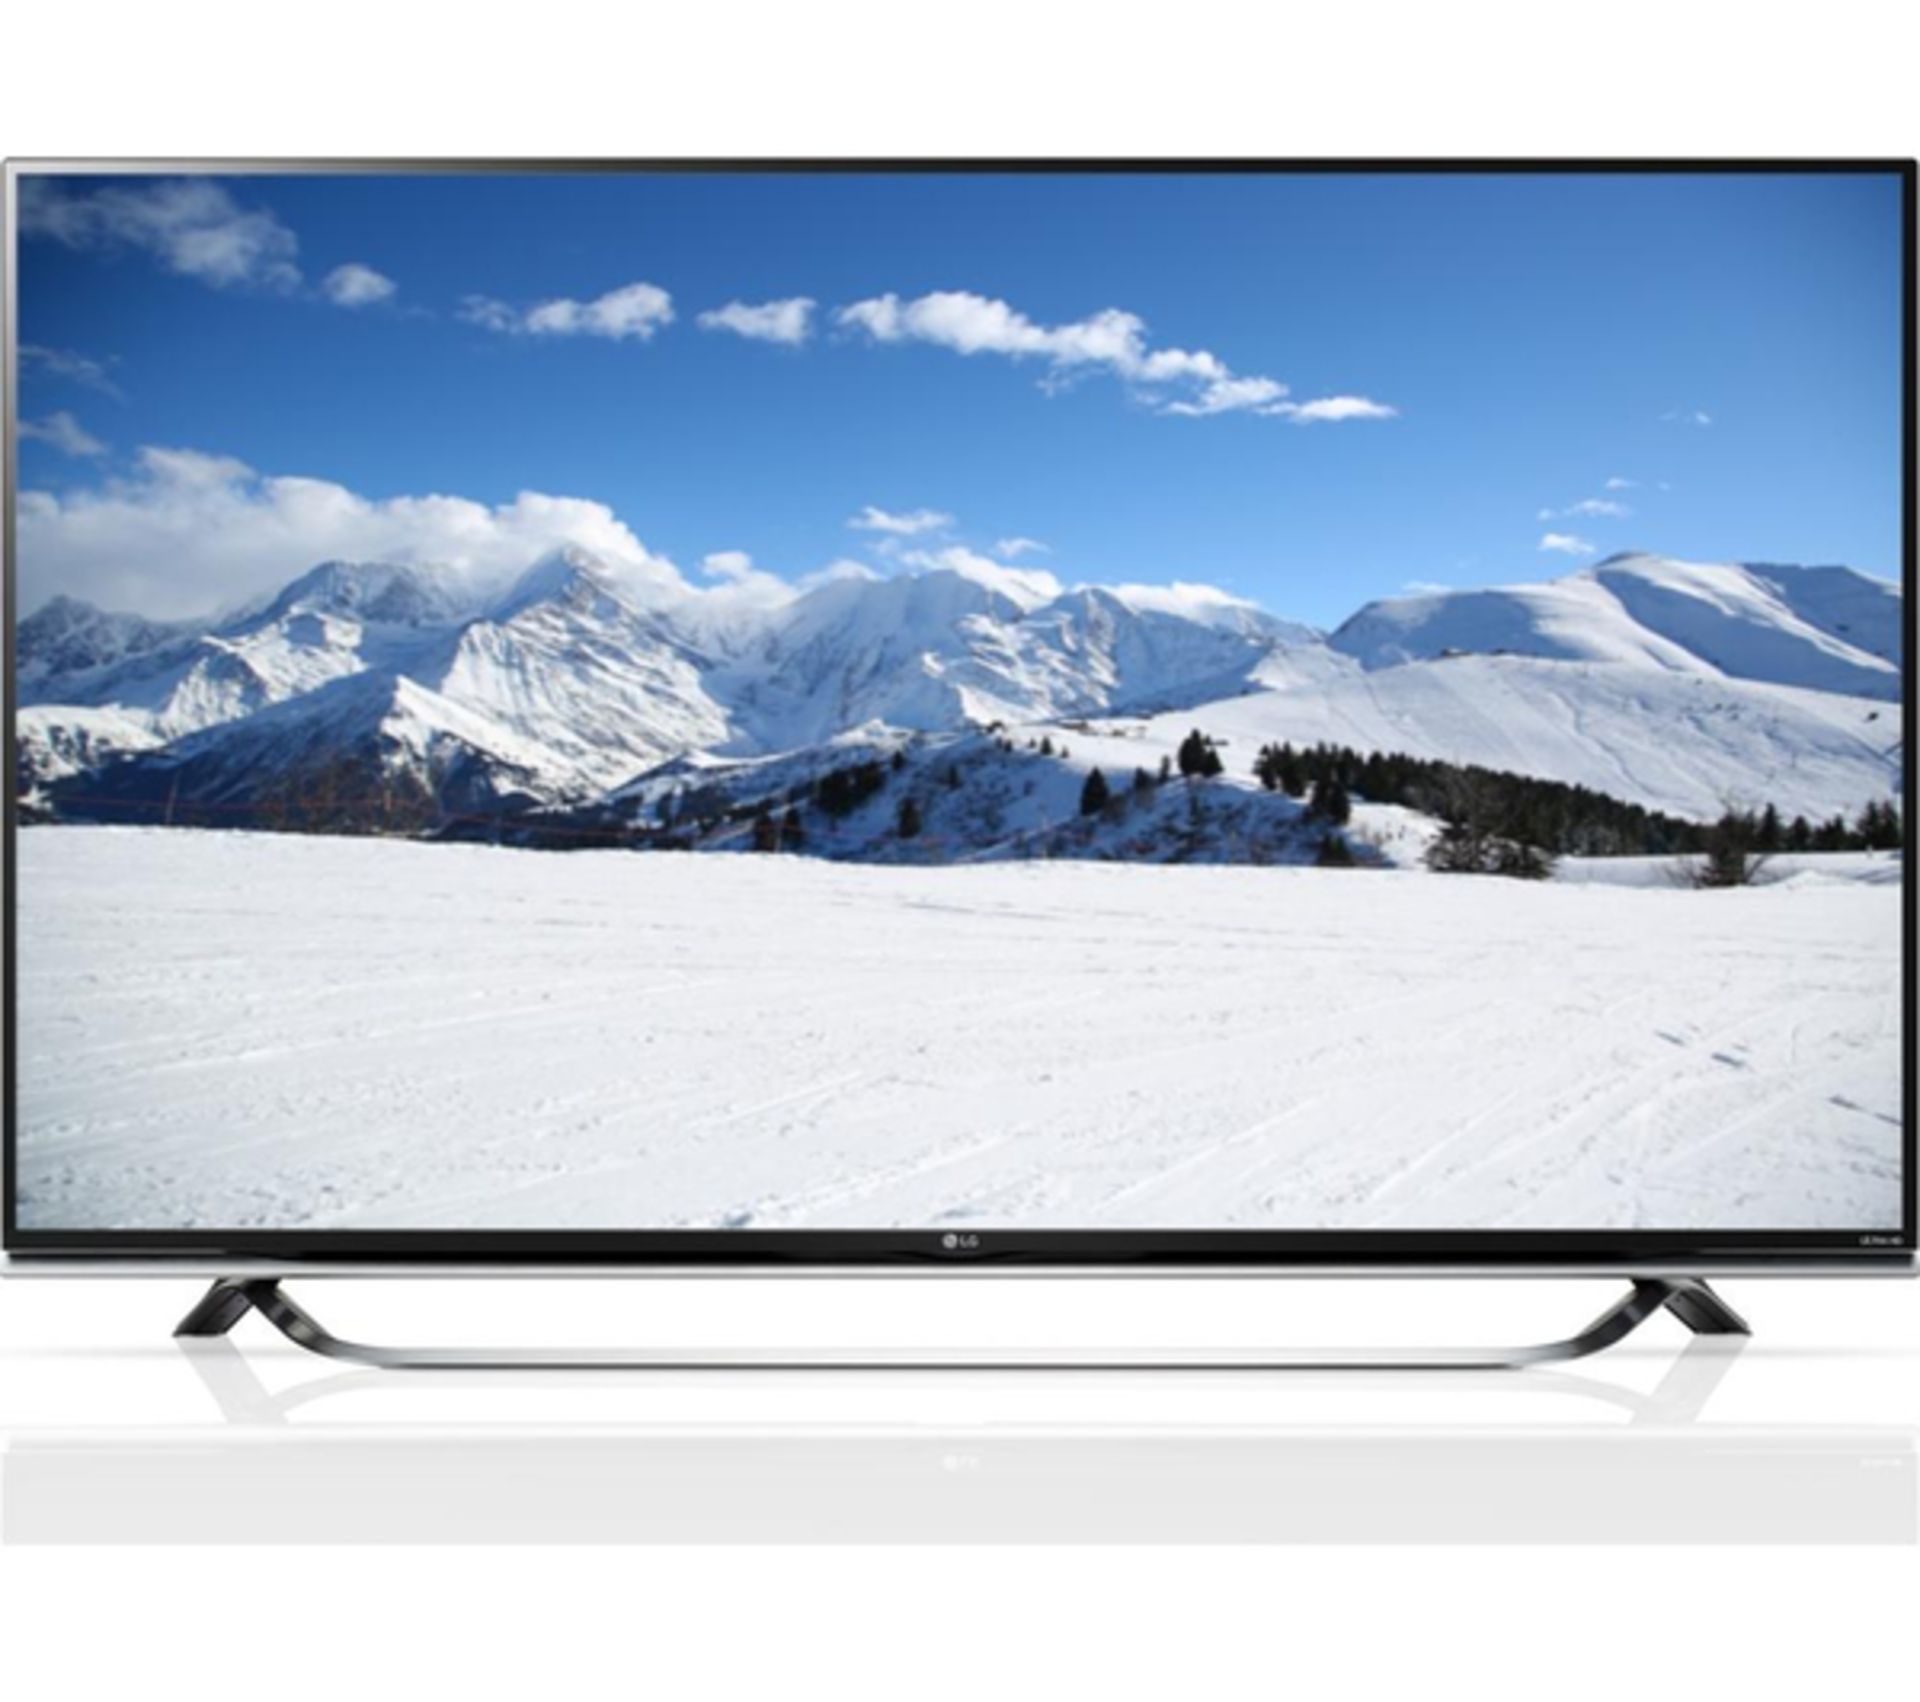 V Grade A 49" 4K ULTRA HD LED 3D SMART TV WITH WEBOS 2.0 & FREEVIEW HD & WIFI - PREMIUM SOUND BY